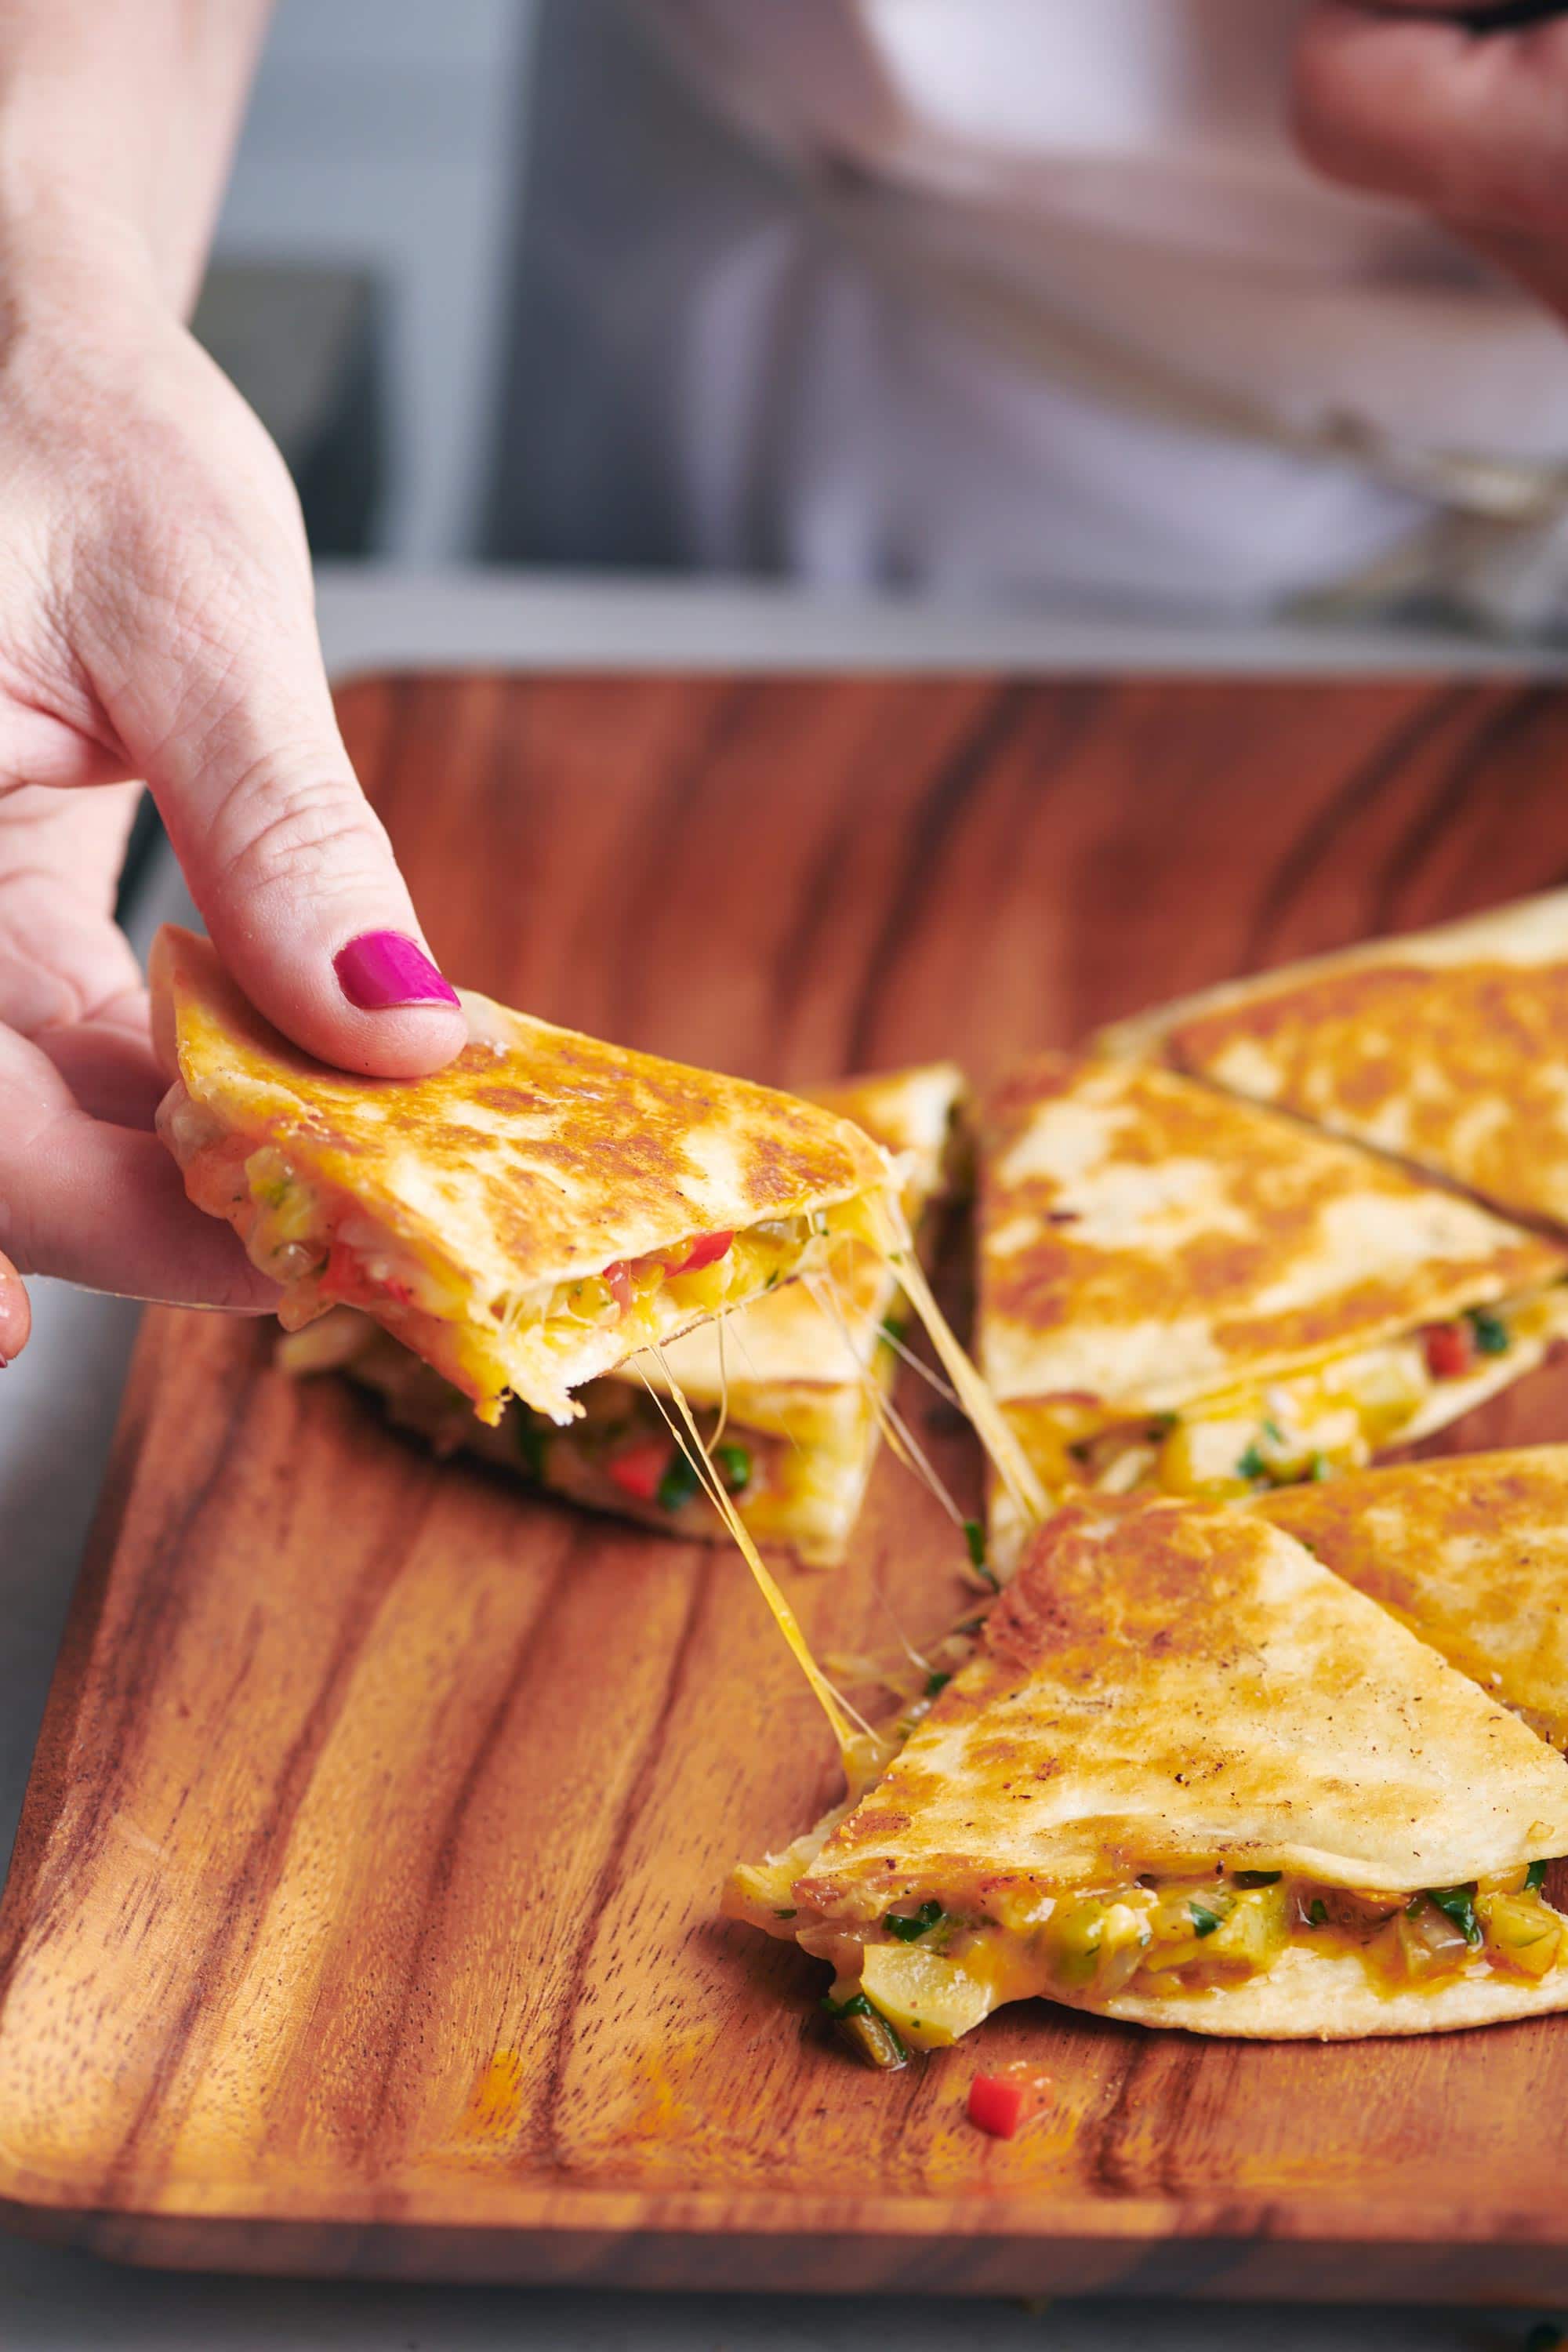 Woman grabbing a Vegetable Quesadilla from a wooden tray.